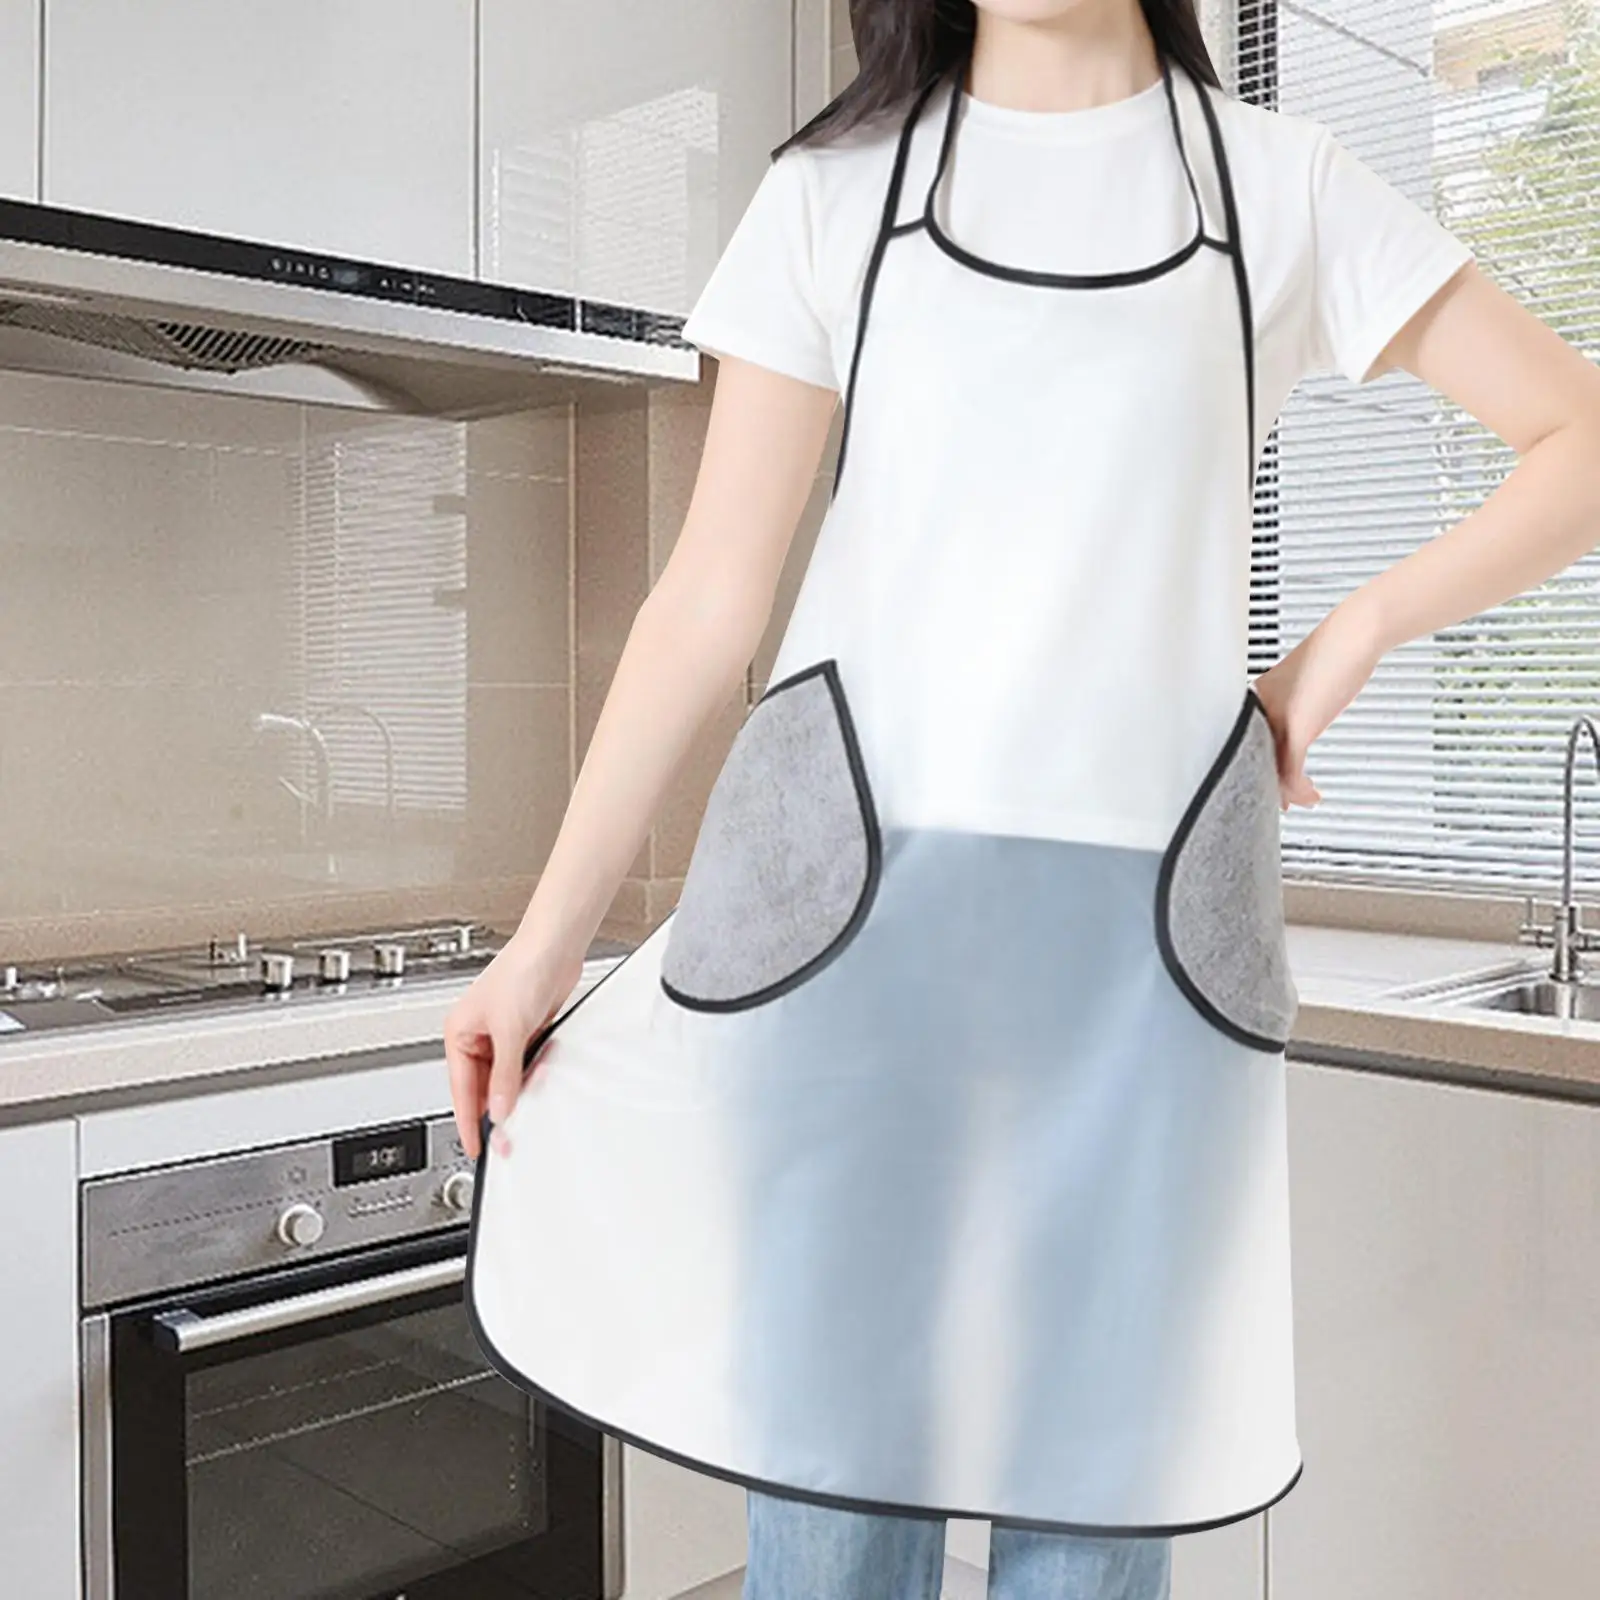 Cooking Apron Baking Apron with Hand Wipe Pockets for Restaurant, Salon Durable Oil Proof BBQ Apron Grilling Apron Works Apron